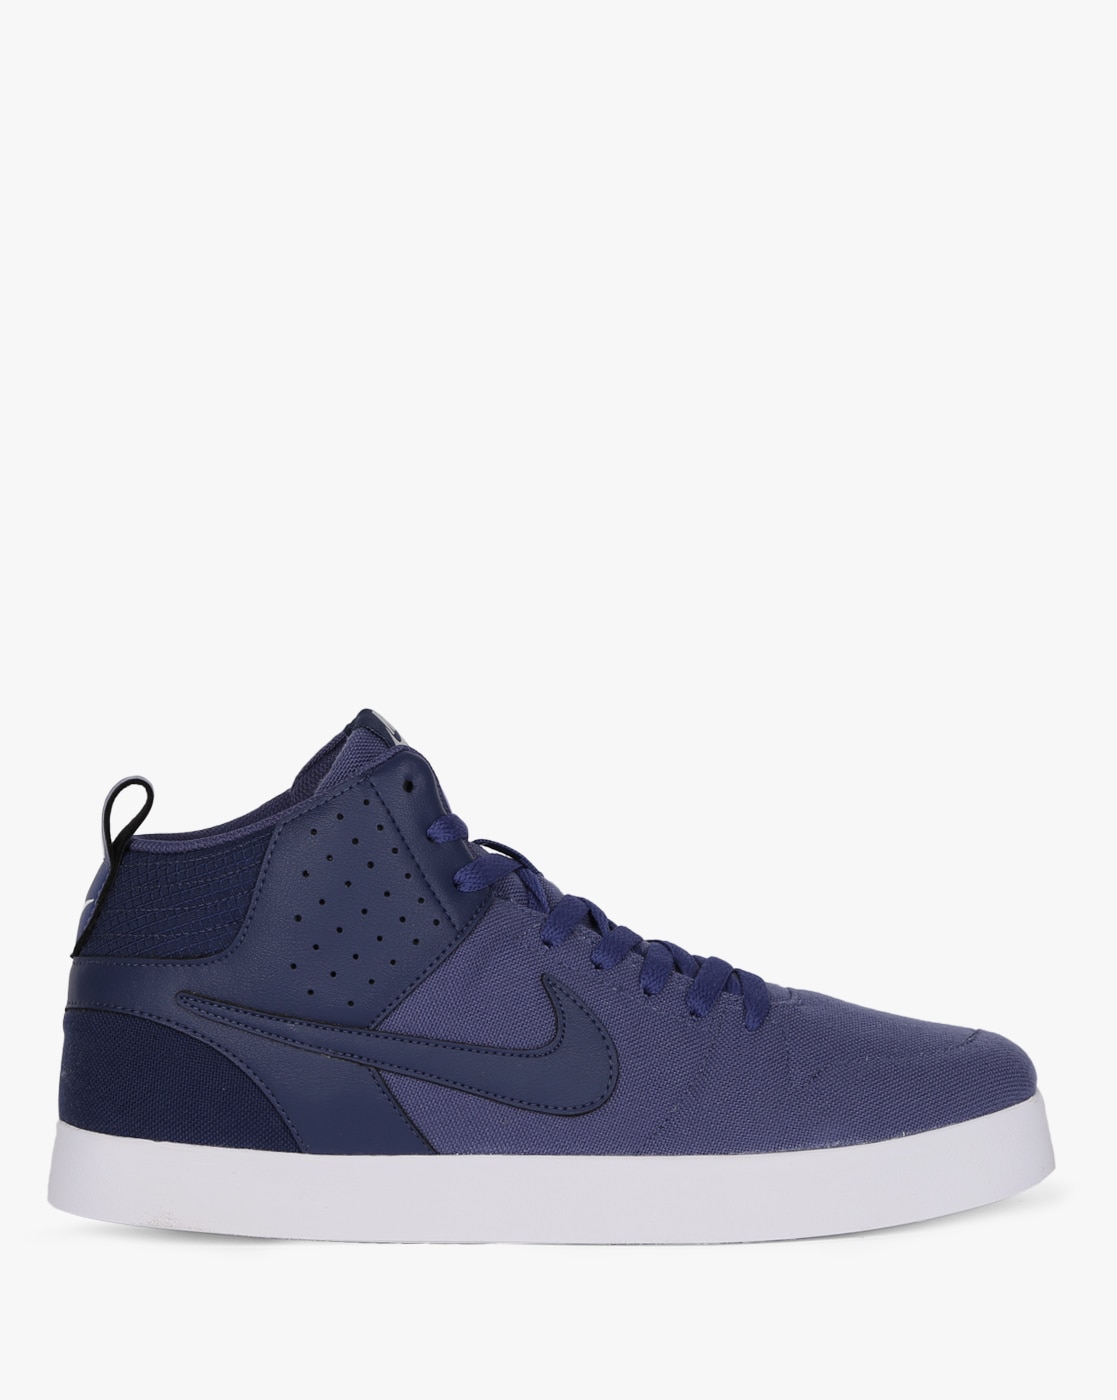 Buy Nike Men Charcoal Grey Liteforce III Mid-Top Sneakers Online at Low  Prices in India - Paytmmall.com